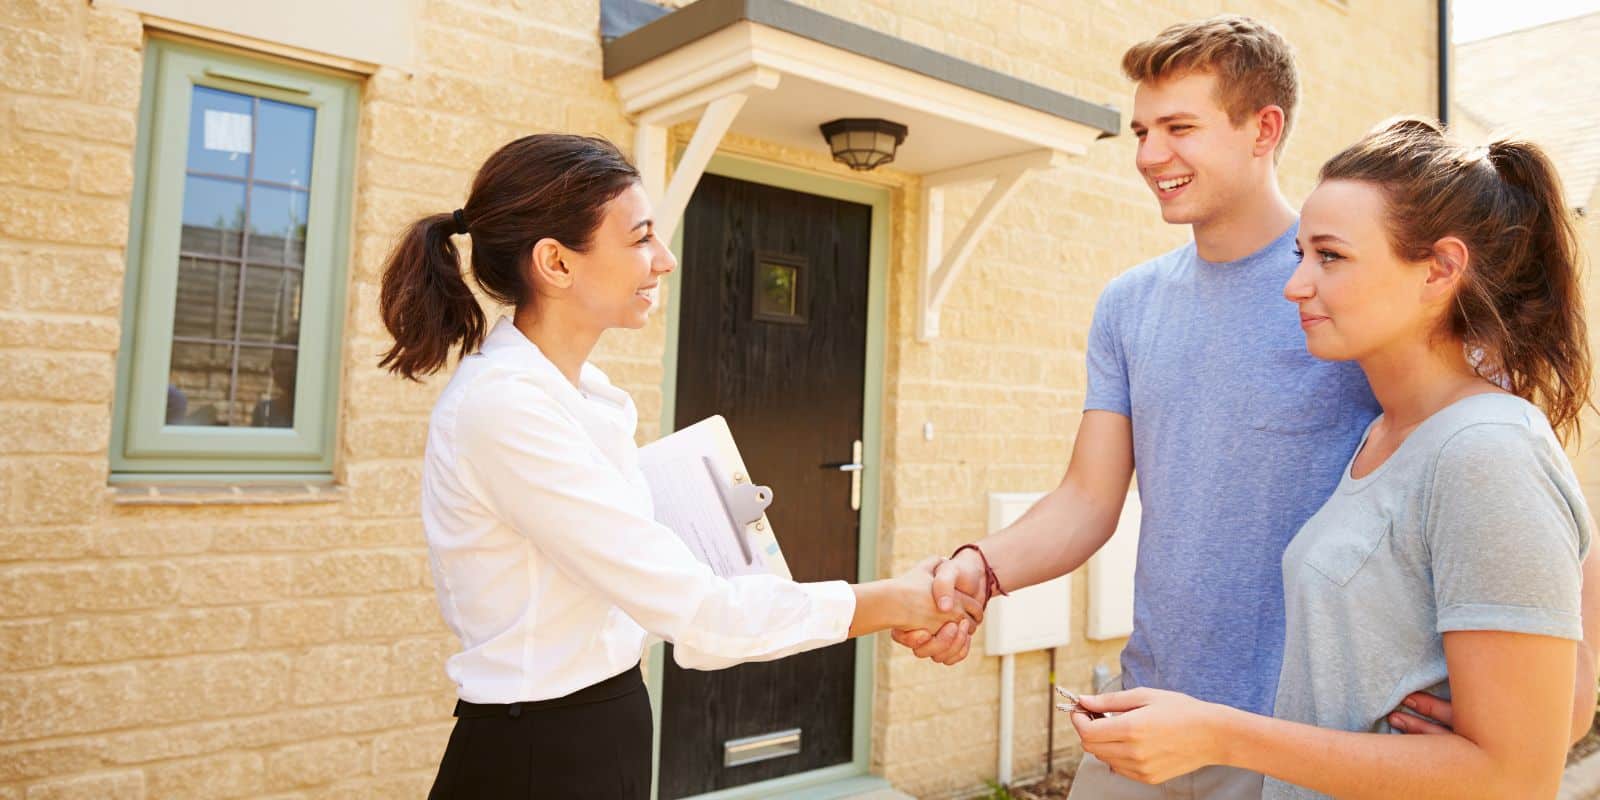 5 Unexpected Benefits of Working With A Real Estate Wholesaler in Stroudsburg, PA